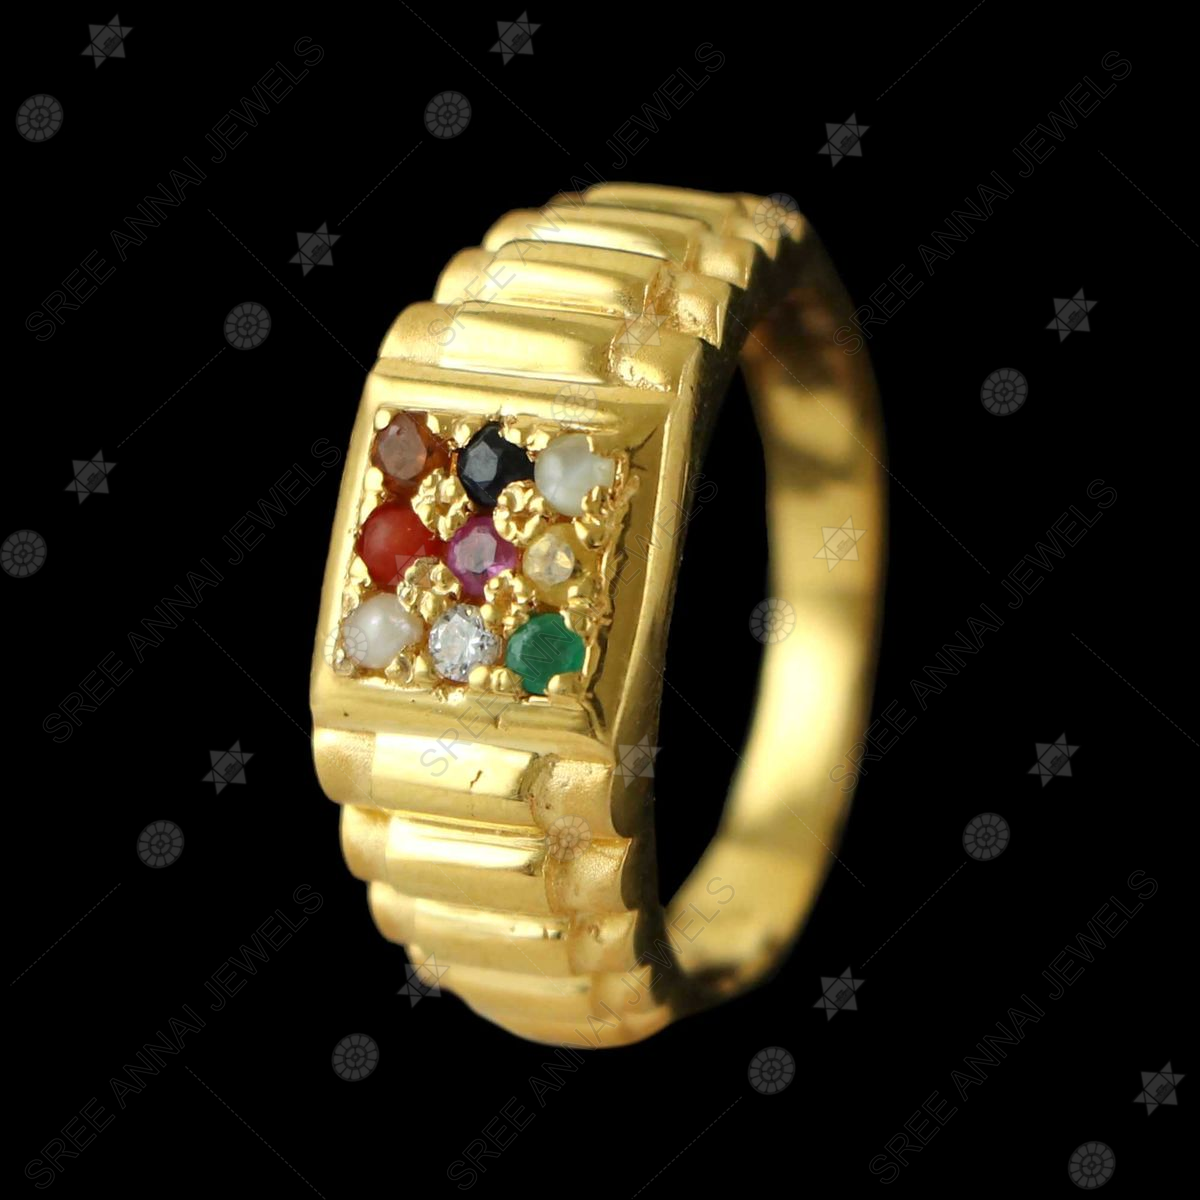 Gold Mens Navratna Ring - RiMs11198 - 22k gold mens Navaratna ring with  multicolor stones studded (Ruby, Emerald, sapphire, coral, cats ey